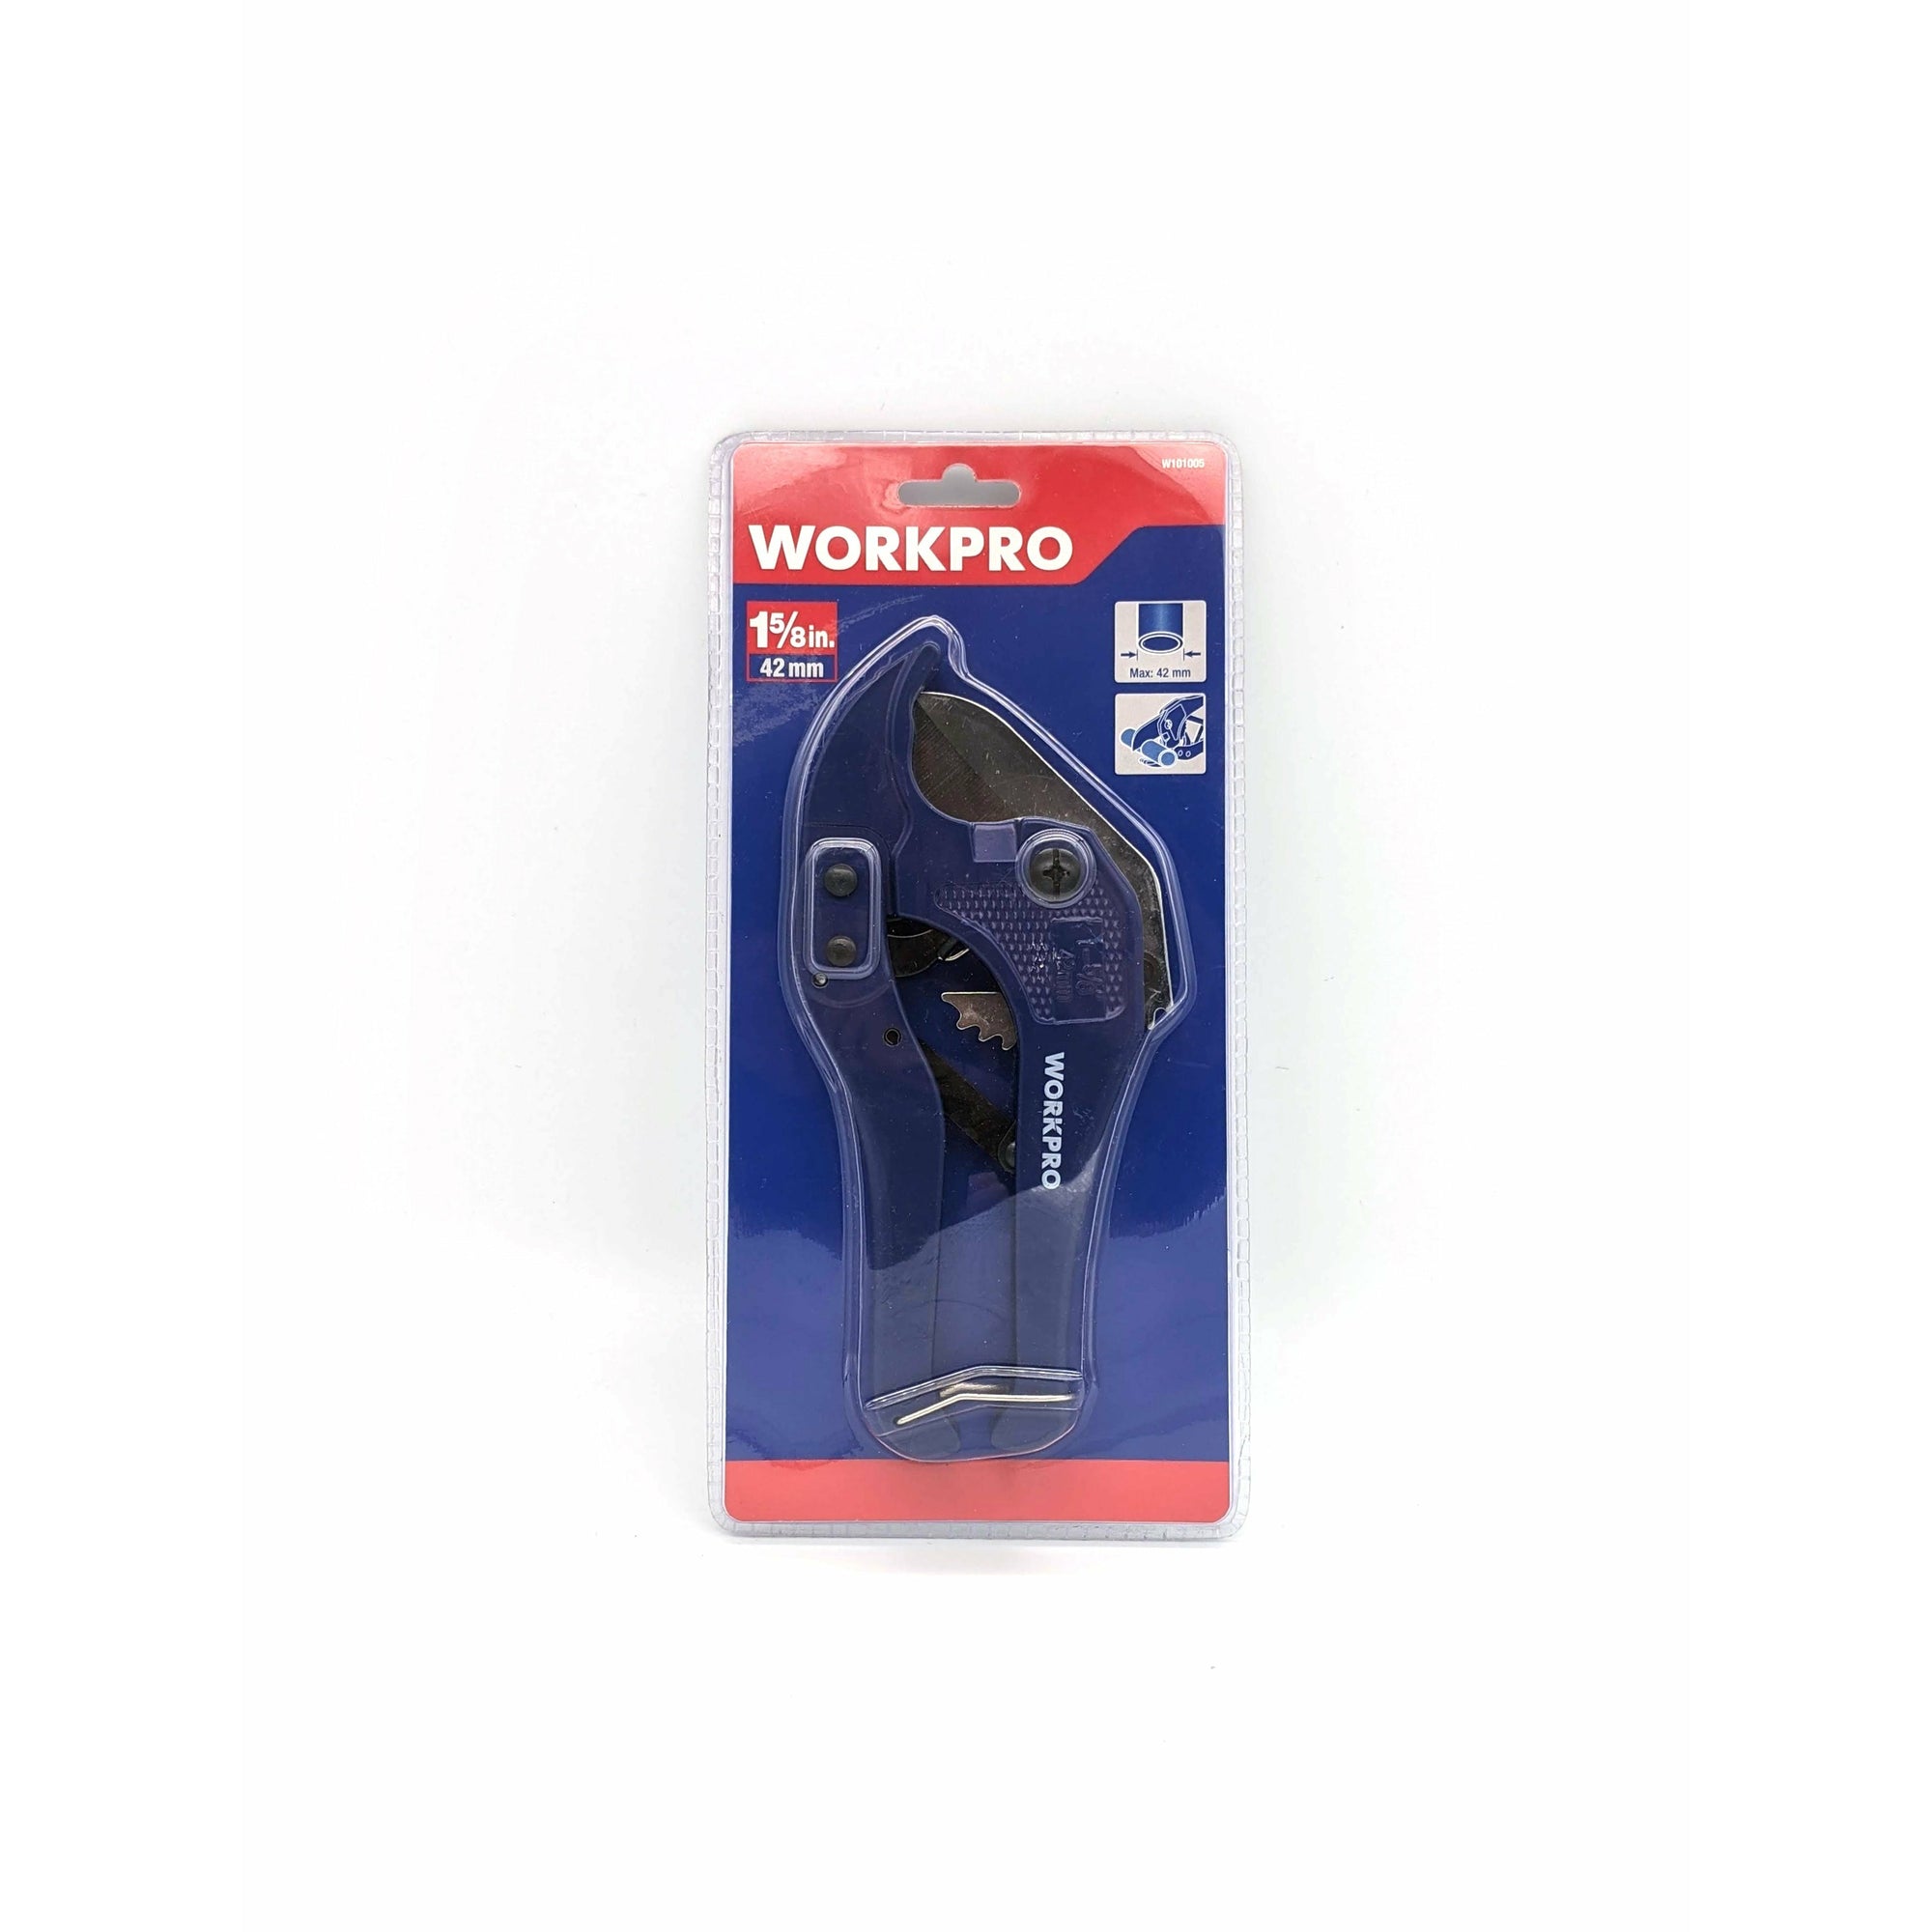 WORKPRO PIPE CUTTER